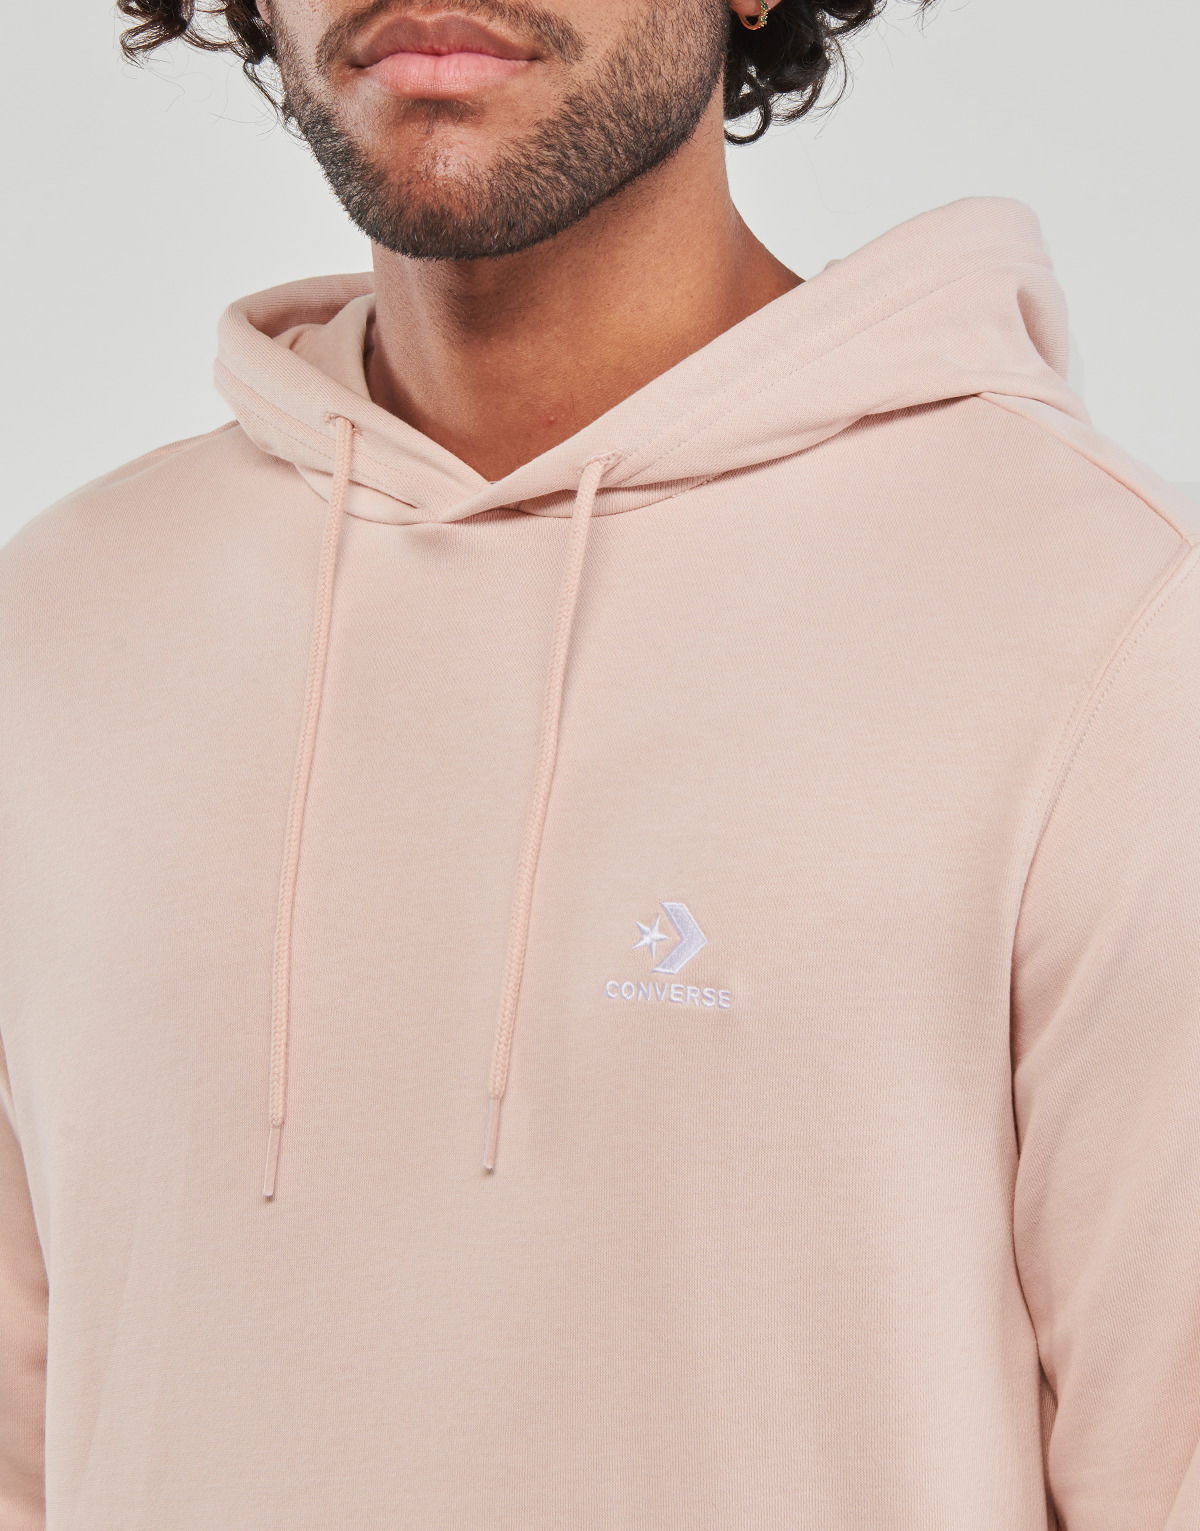 Go-To Embroidered Hoodie